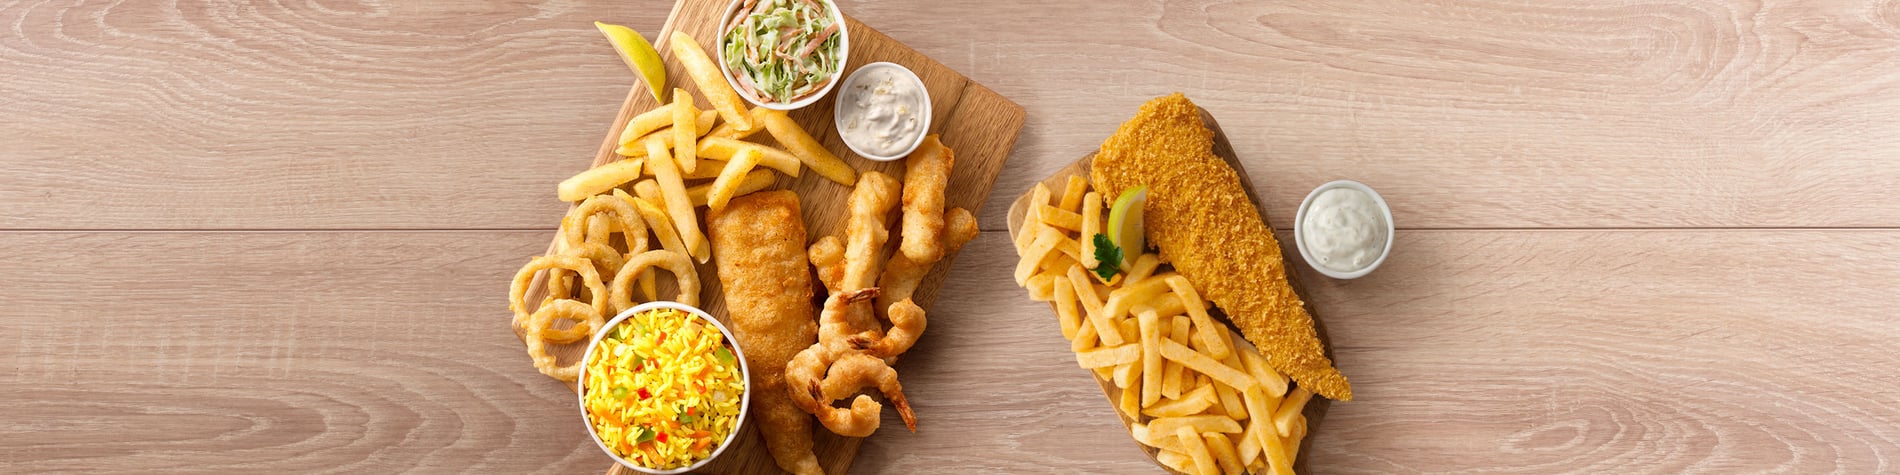 Seafood meals from Fishaways Noordheuwel including a Crunchy Fish and Chips meal and a seafood Platter for One with hake, calamari, prawns, chips, onion rings, and coleslaw.